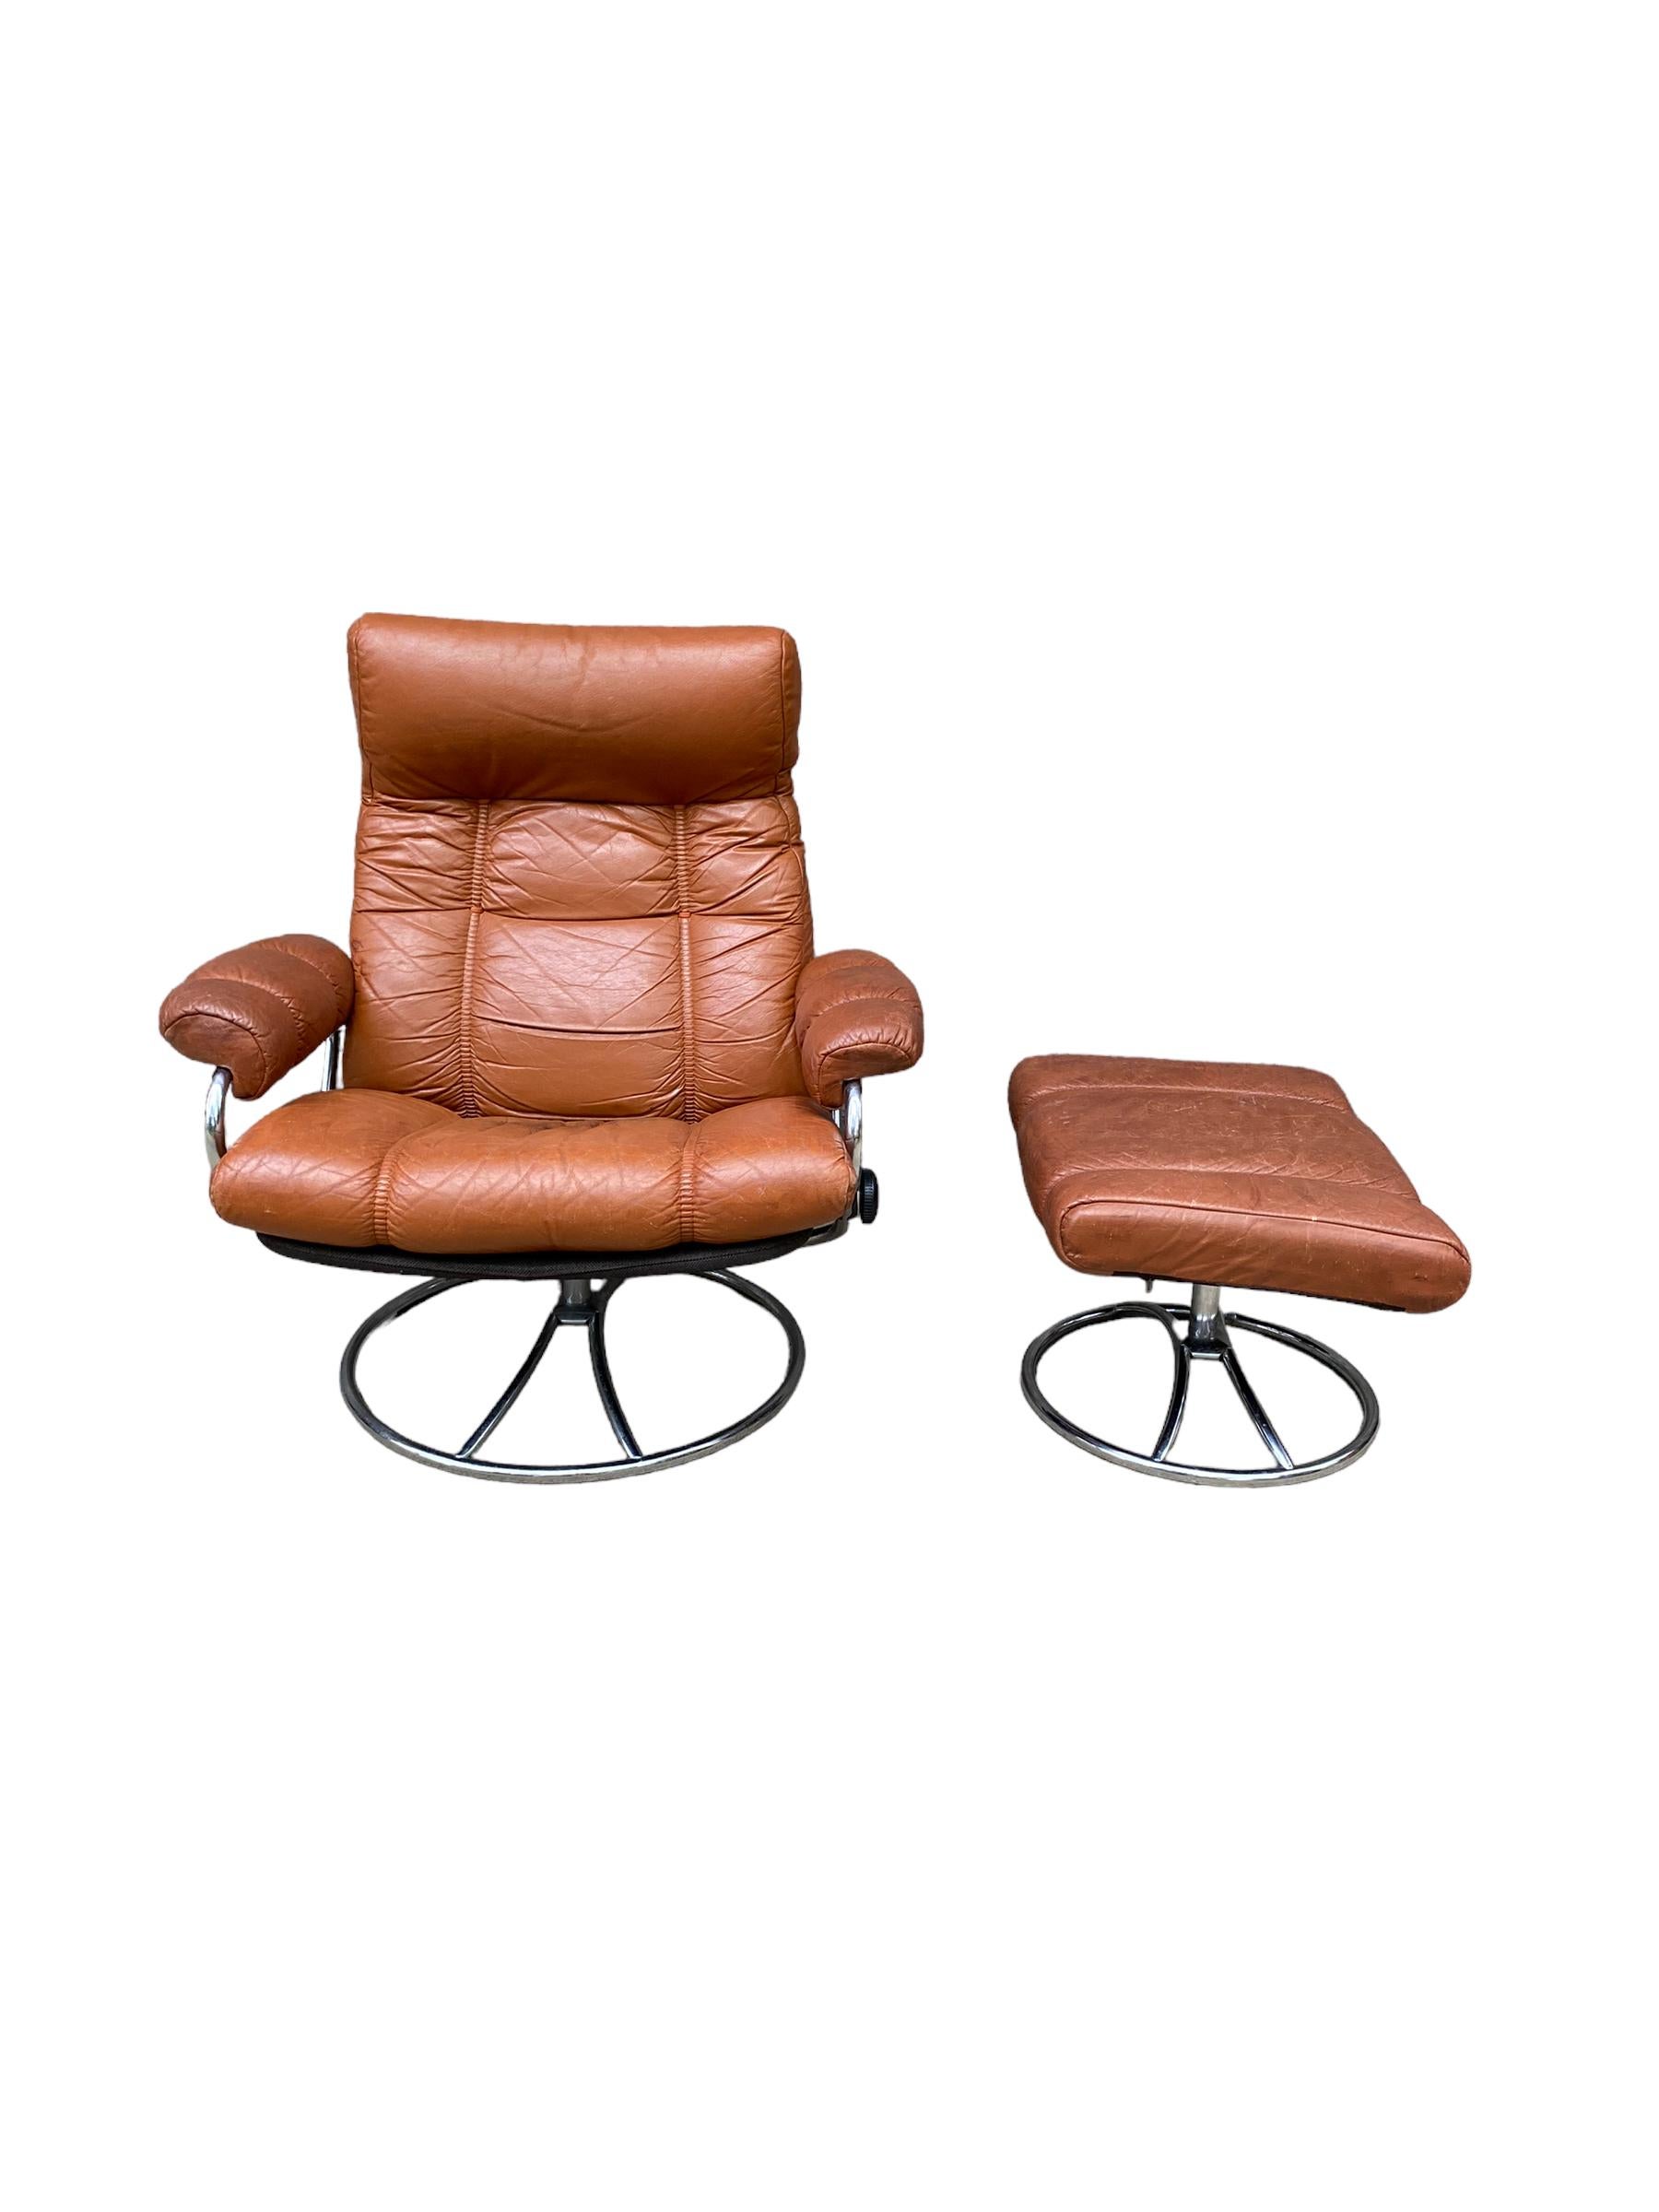 Ekornes Stressless reclining lounge chair and ottoman. Elegant mid century Scandinavian design with tubular bent chrome frame and cognac brown leather cushion. Lounge in comfort with this timeless design.